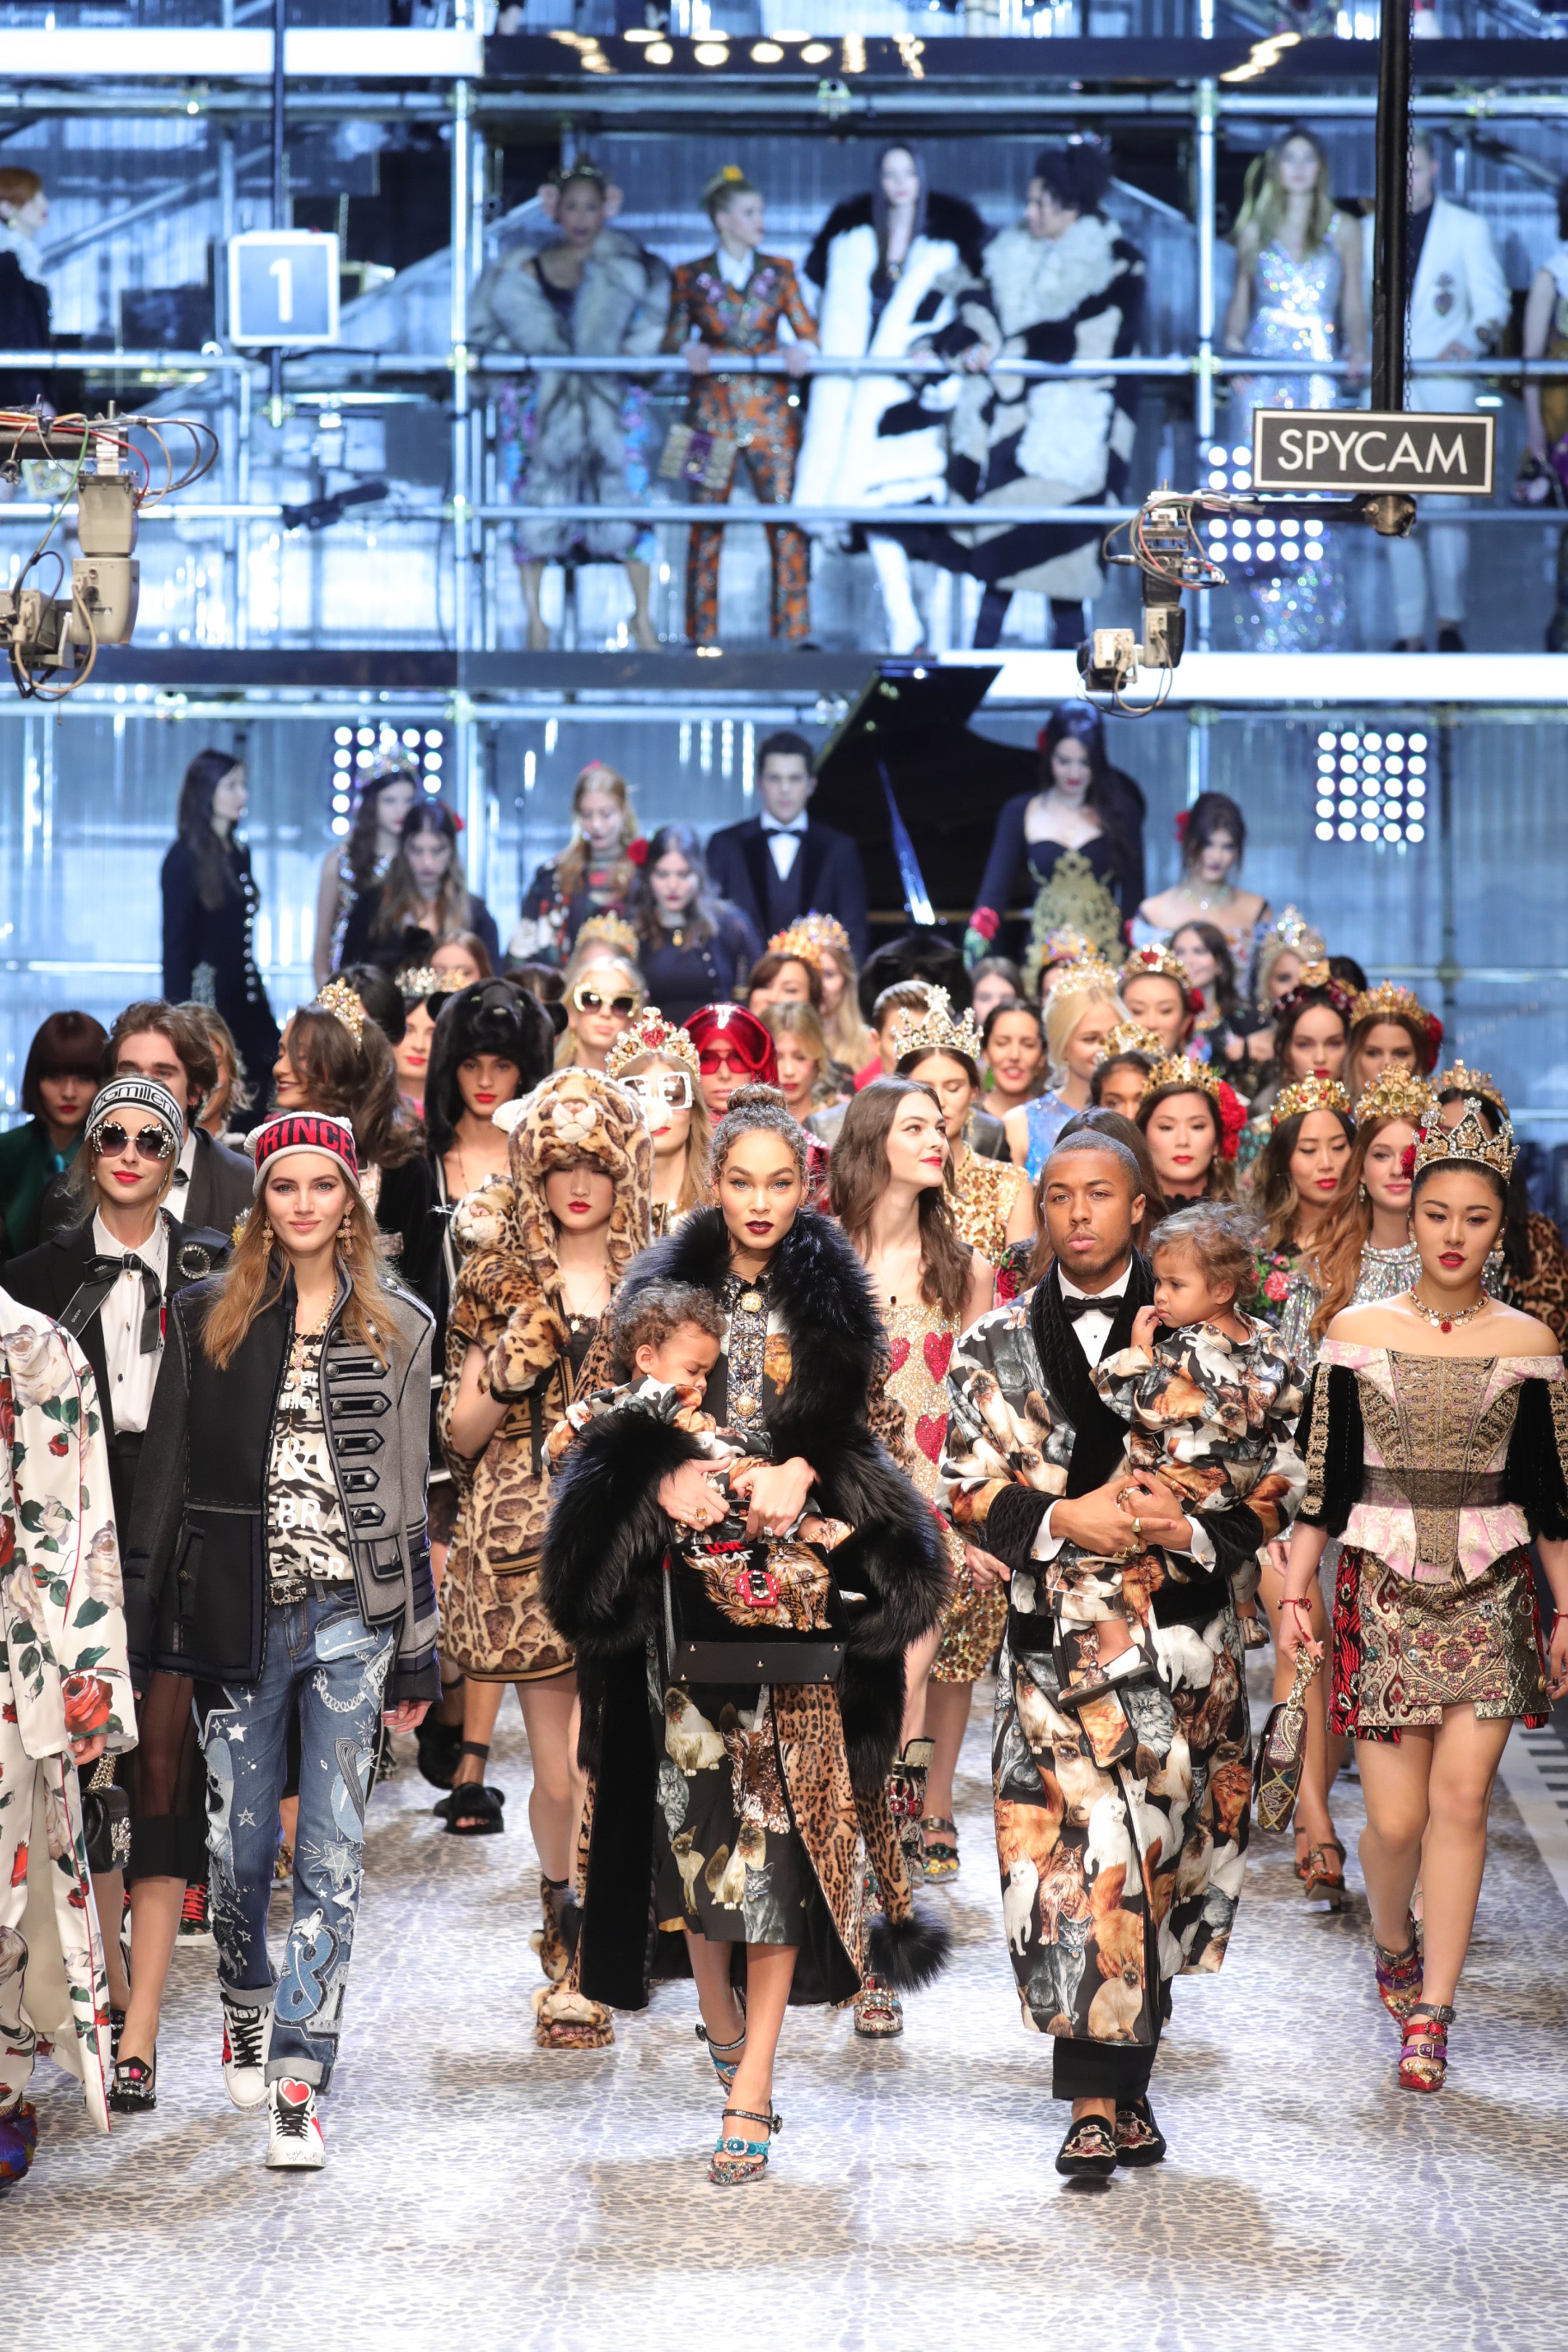 You Have to See How the Harveys Took Over Dolce & Gabbana's Milan Runway Show
